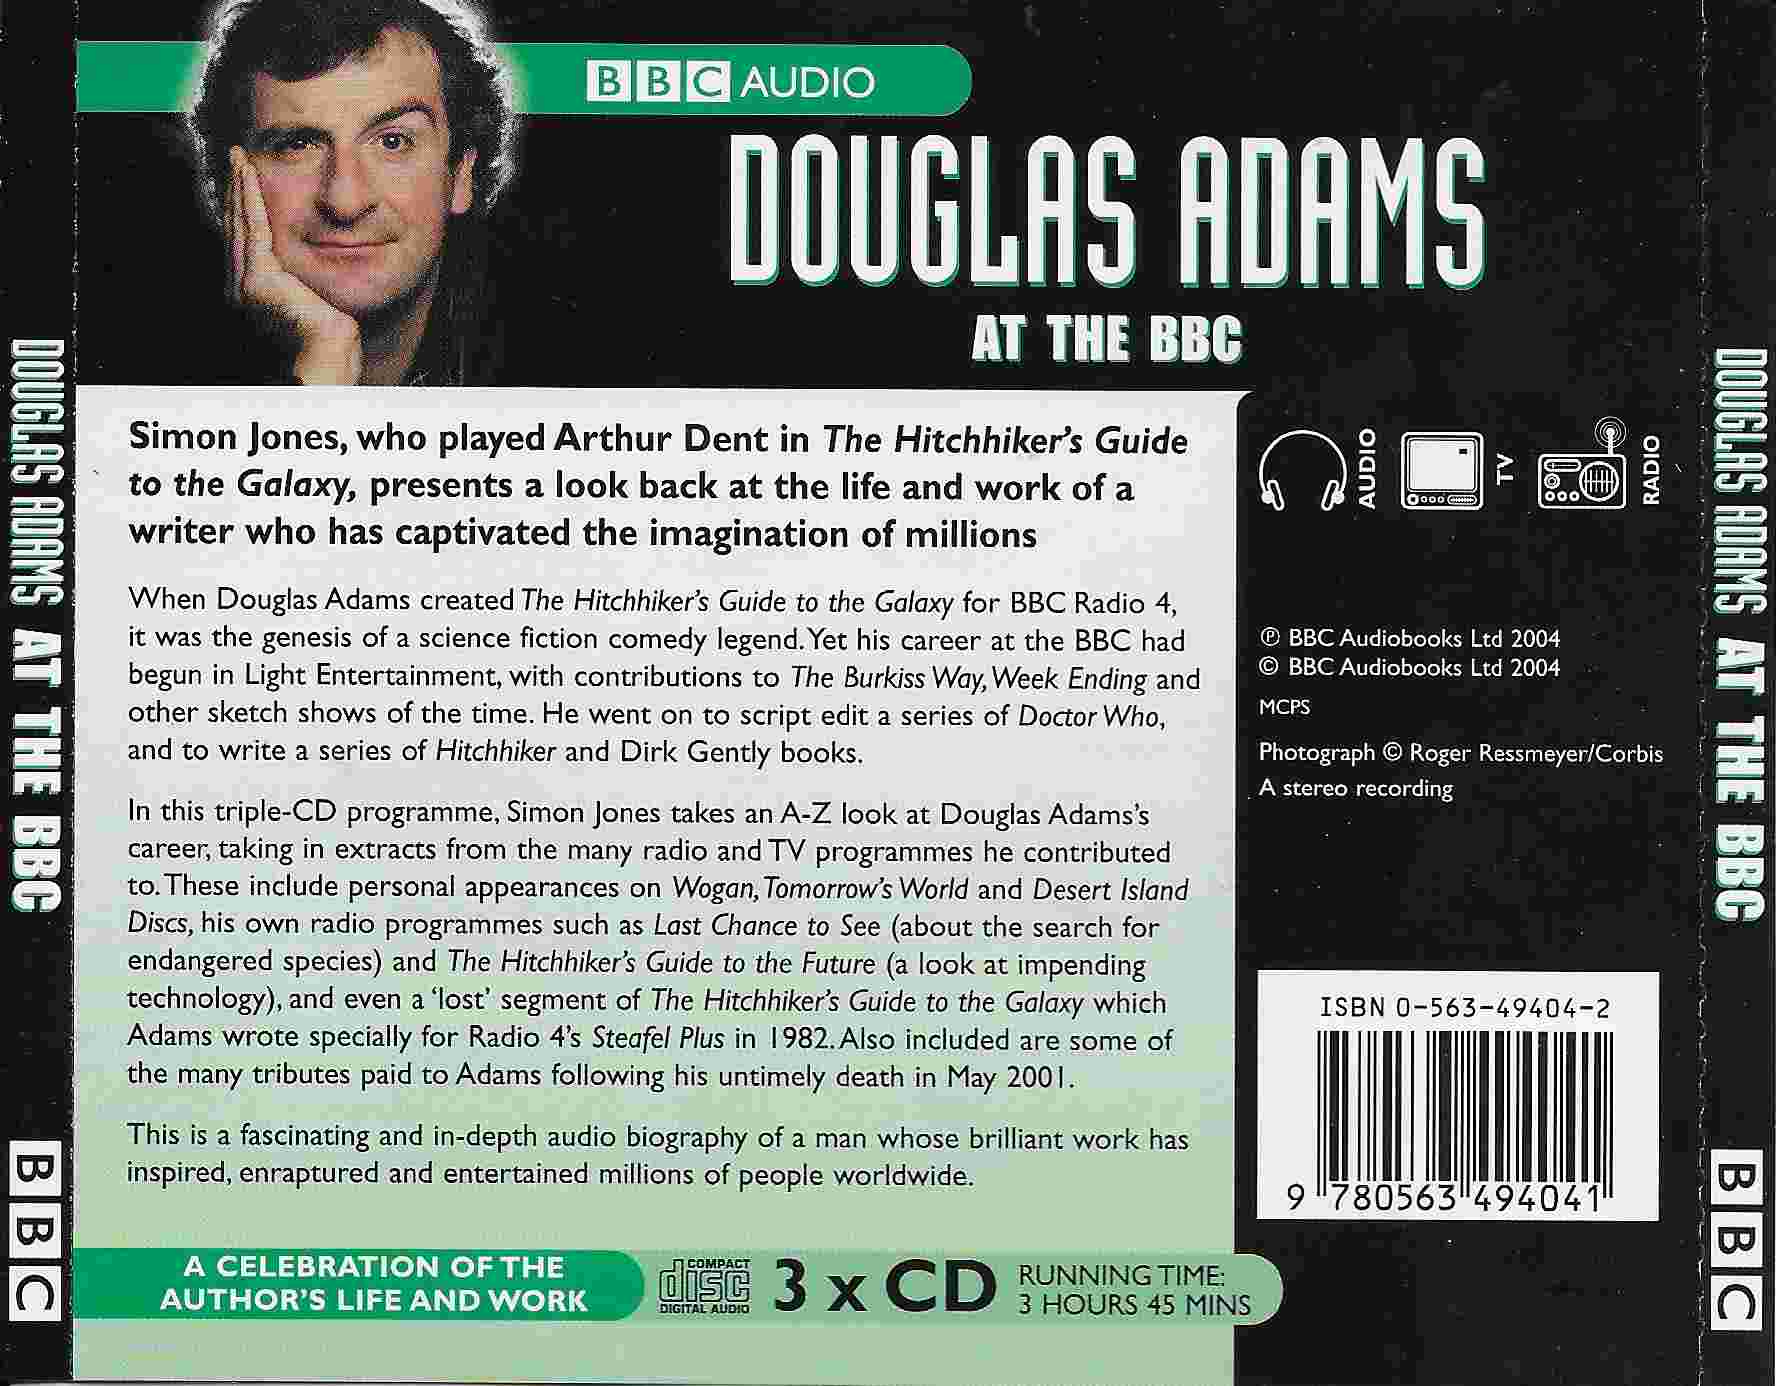 Picture of ISBN 0-563-49404-2 Douglas Adams at the BBC by artist Various from the BBC records and Tapes library